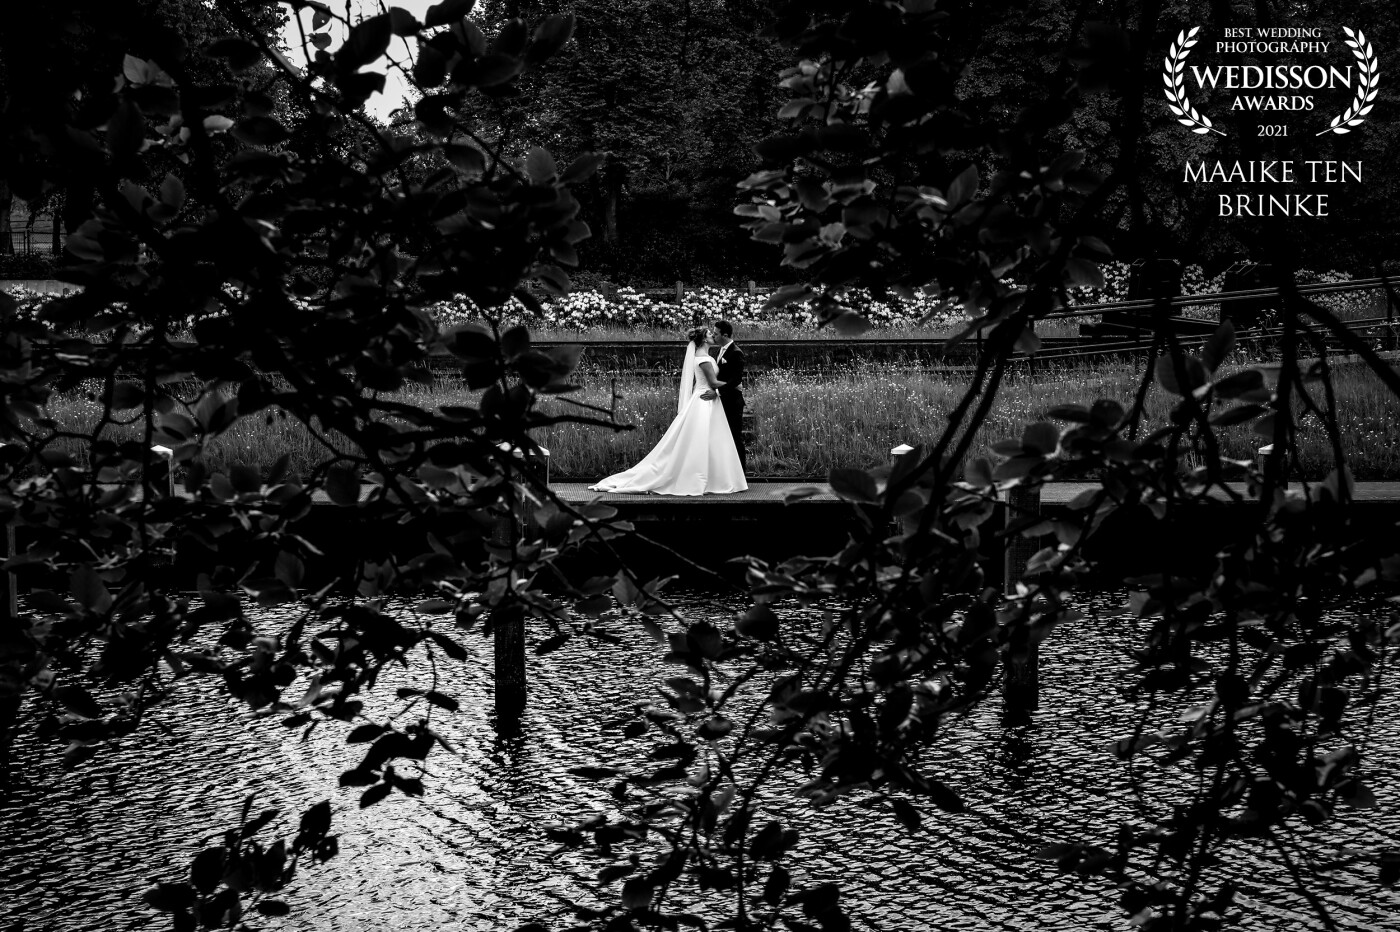 During this fine wedding in May it was very windy. It was a challenge to photograph the bridal couple between the leaves, but a very nice challenge, with this photo as a result.